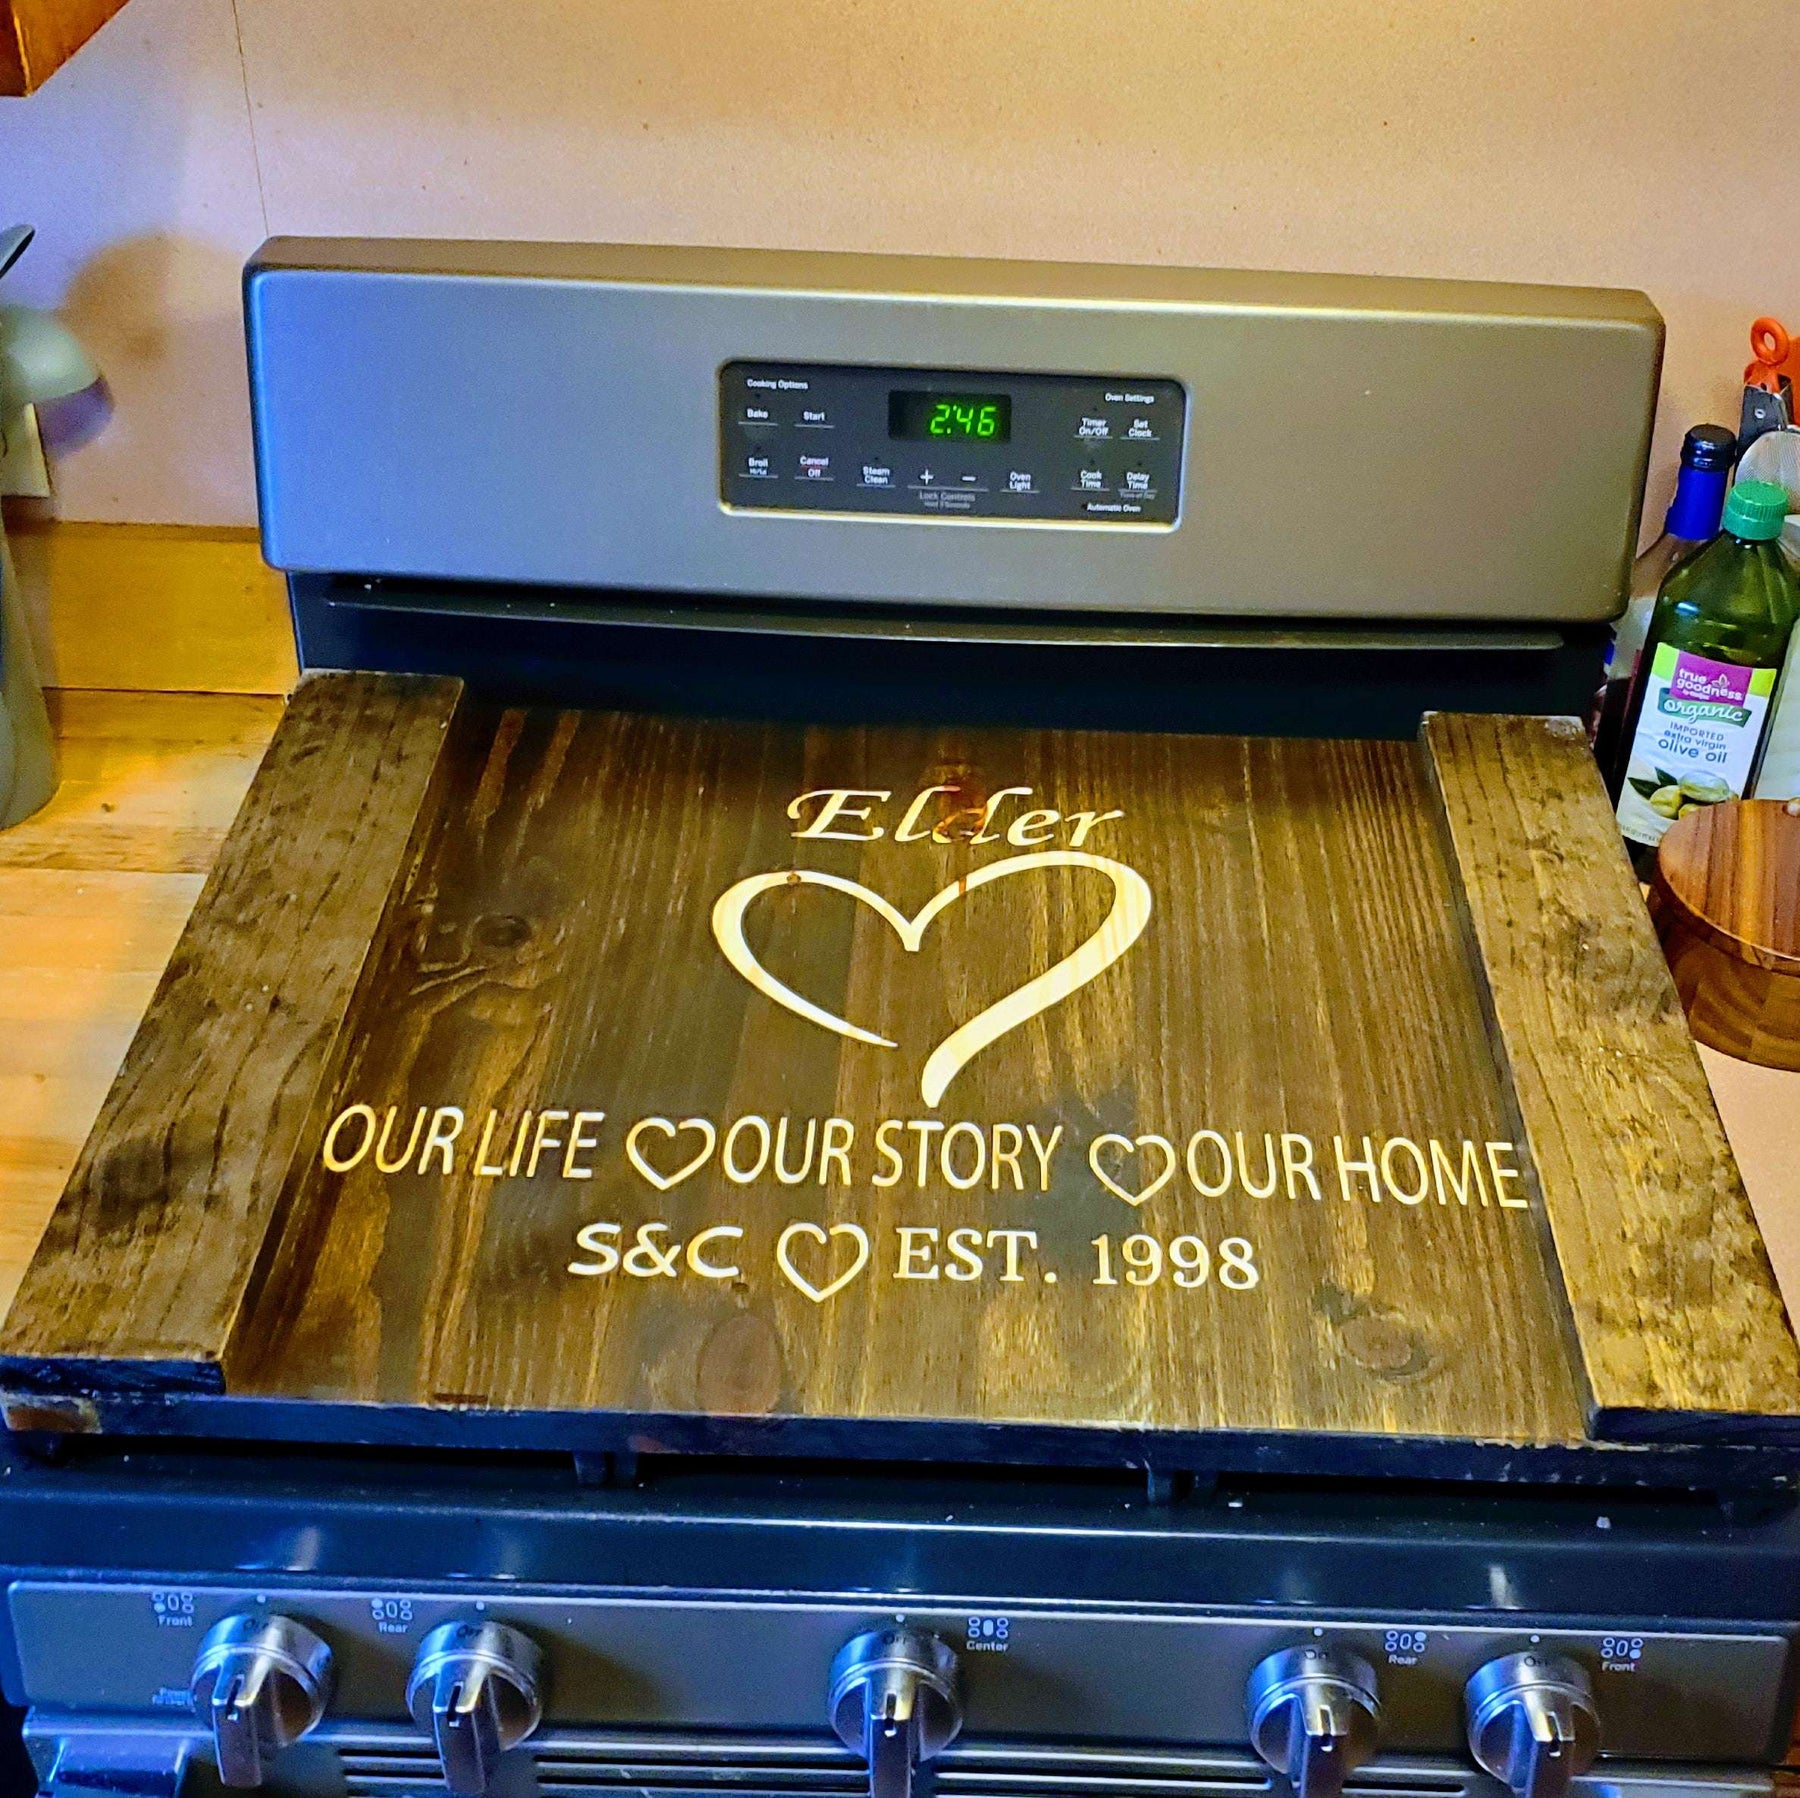 Stove top cover wood-noodle board-electric stove cover-kitchen